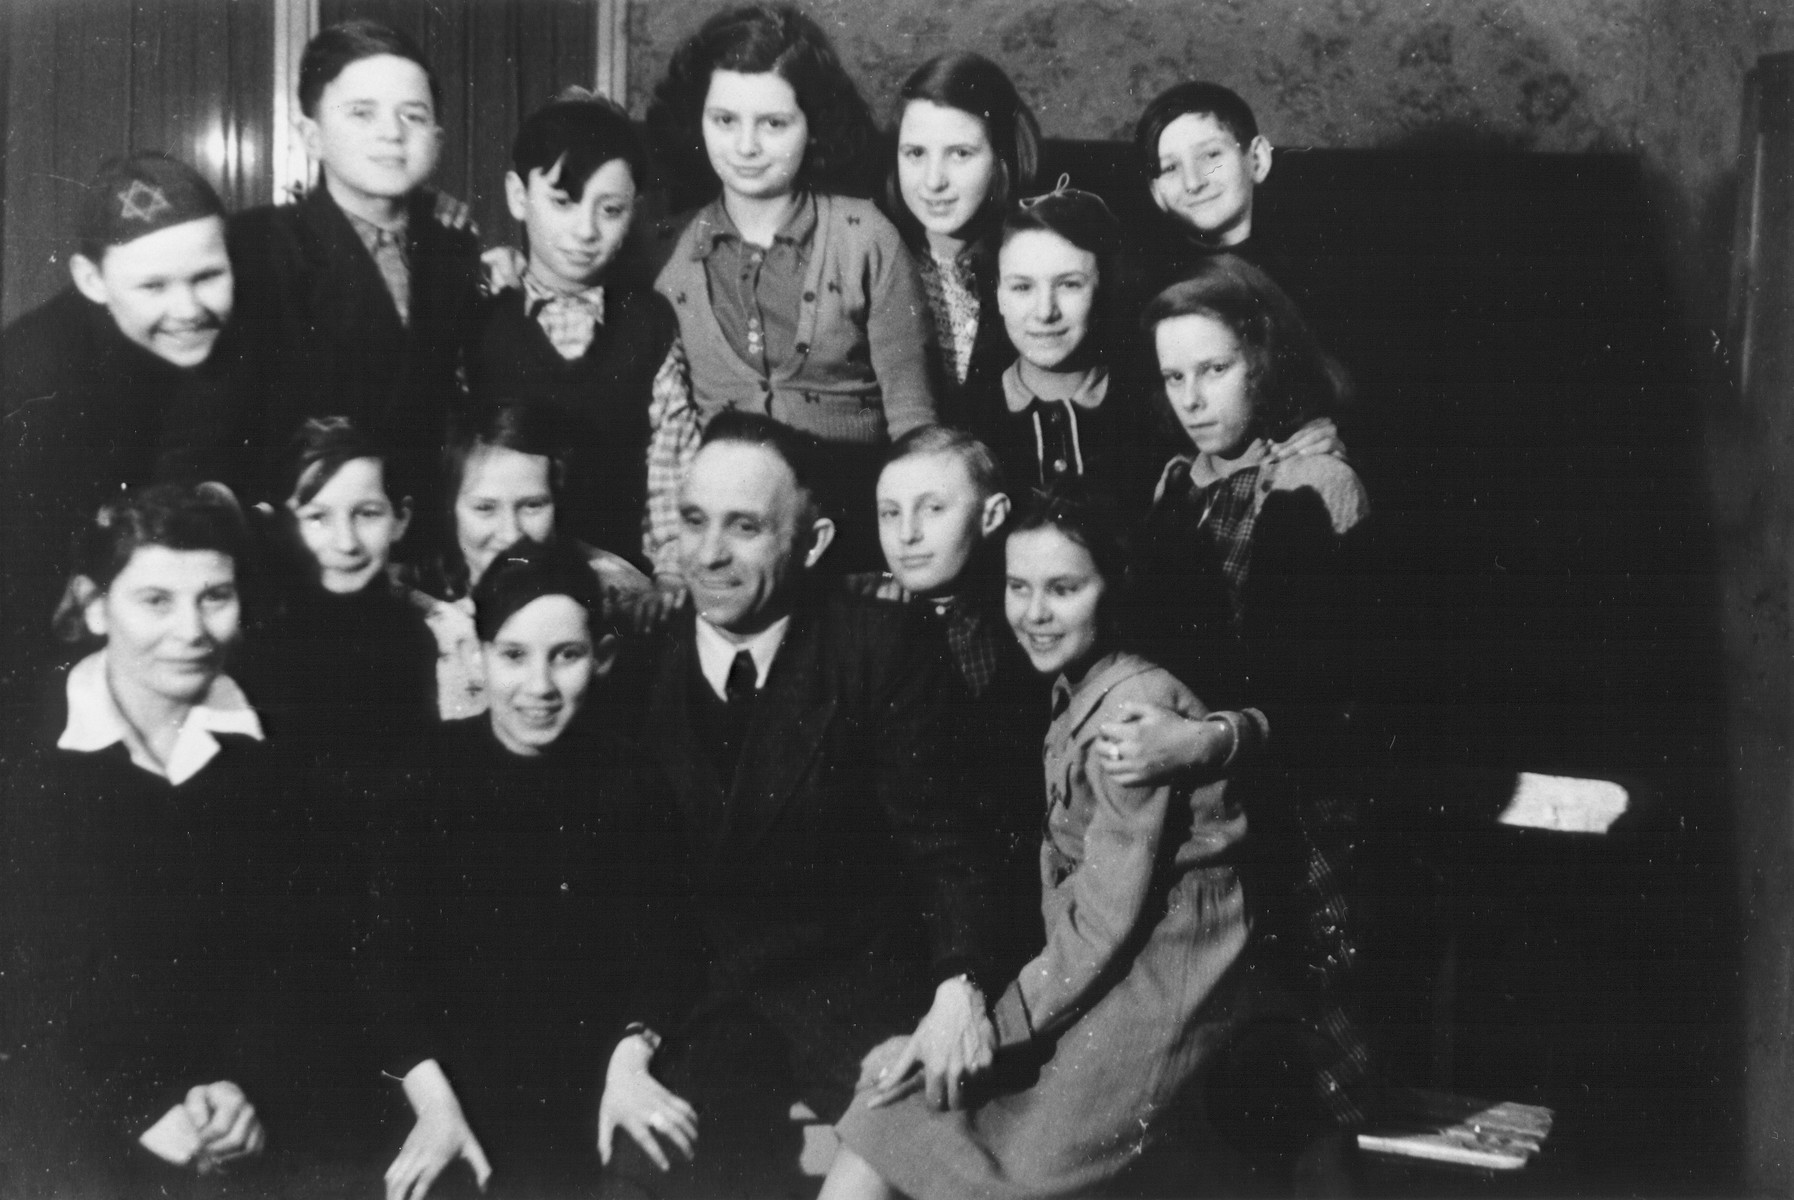 Group portrait of students and teachers of the Jewish (Deutsche Juedische Jugend) school at the Berlin Chaplains' Center.

Pictured are Sima Portnoy (front row, far left) and Carl Busch (front row, third from right).